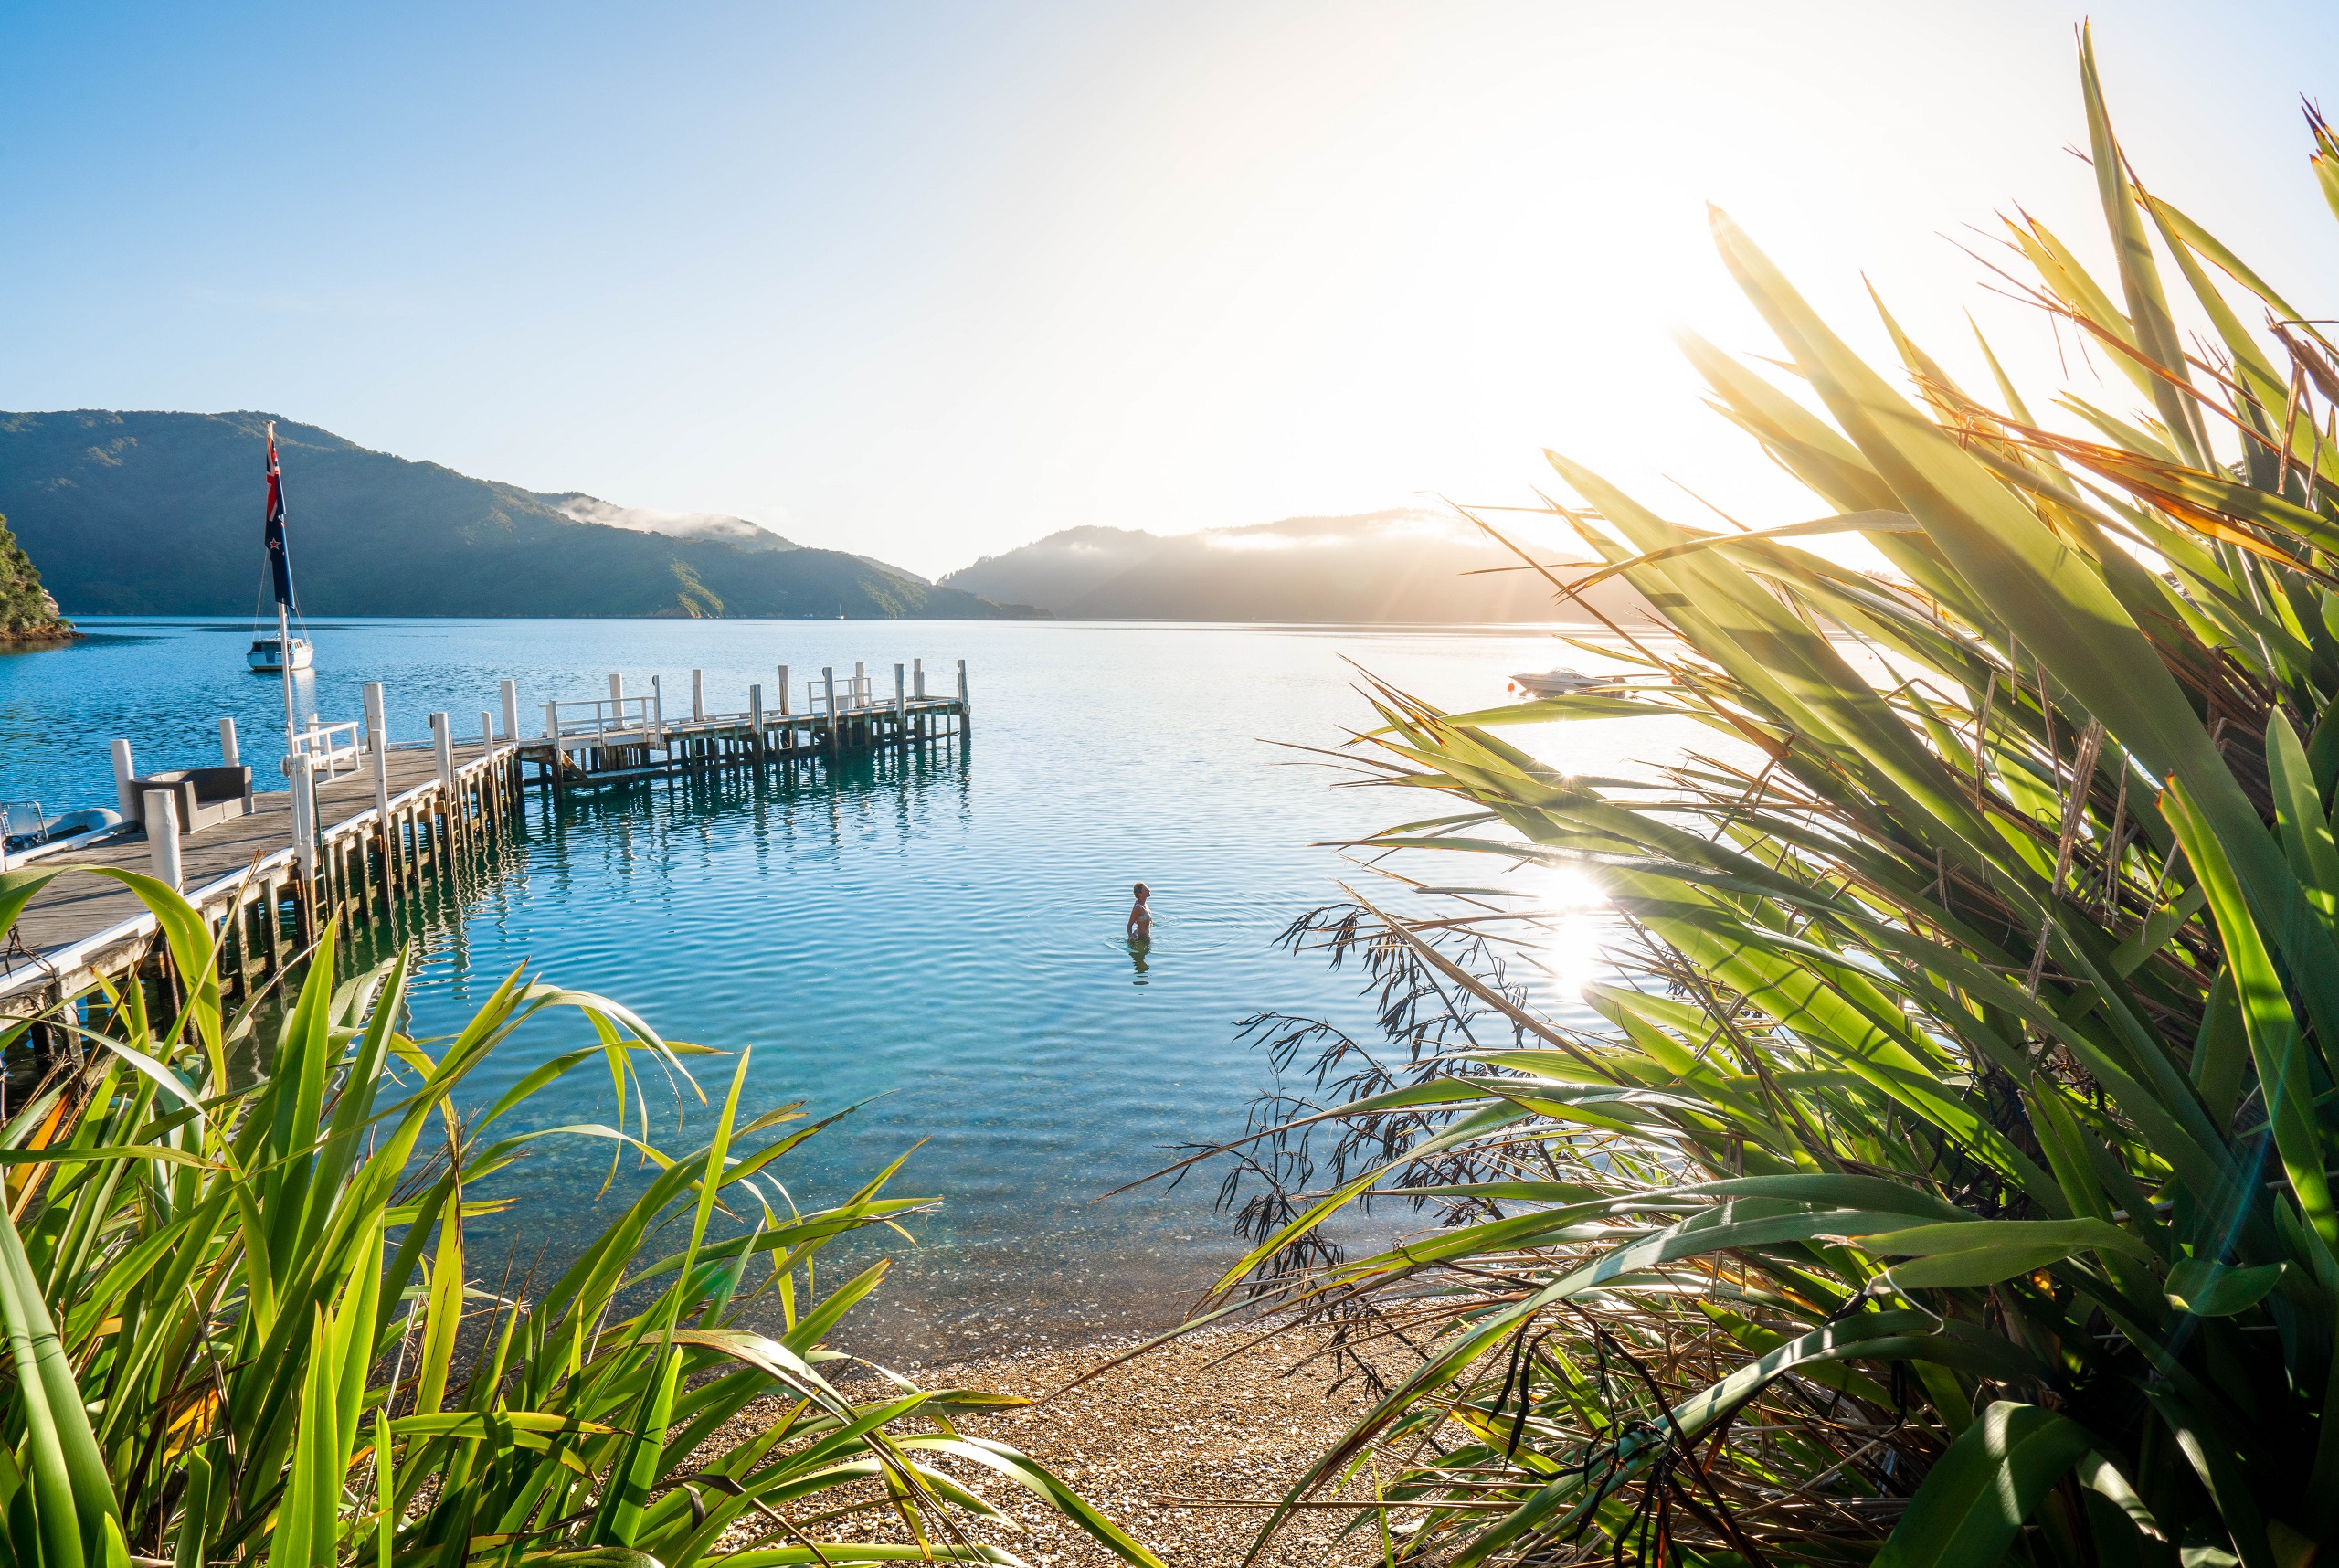 Wharf at Bay of Many Coves Resort in the Marlborough Sounds